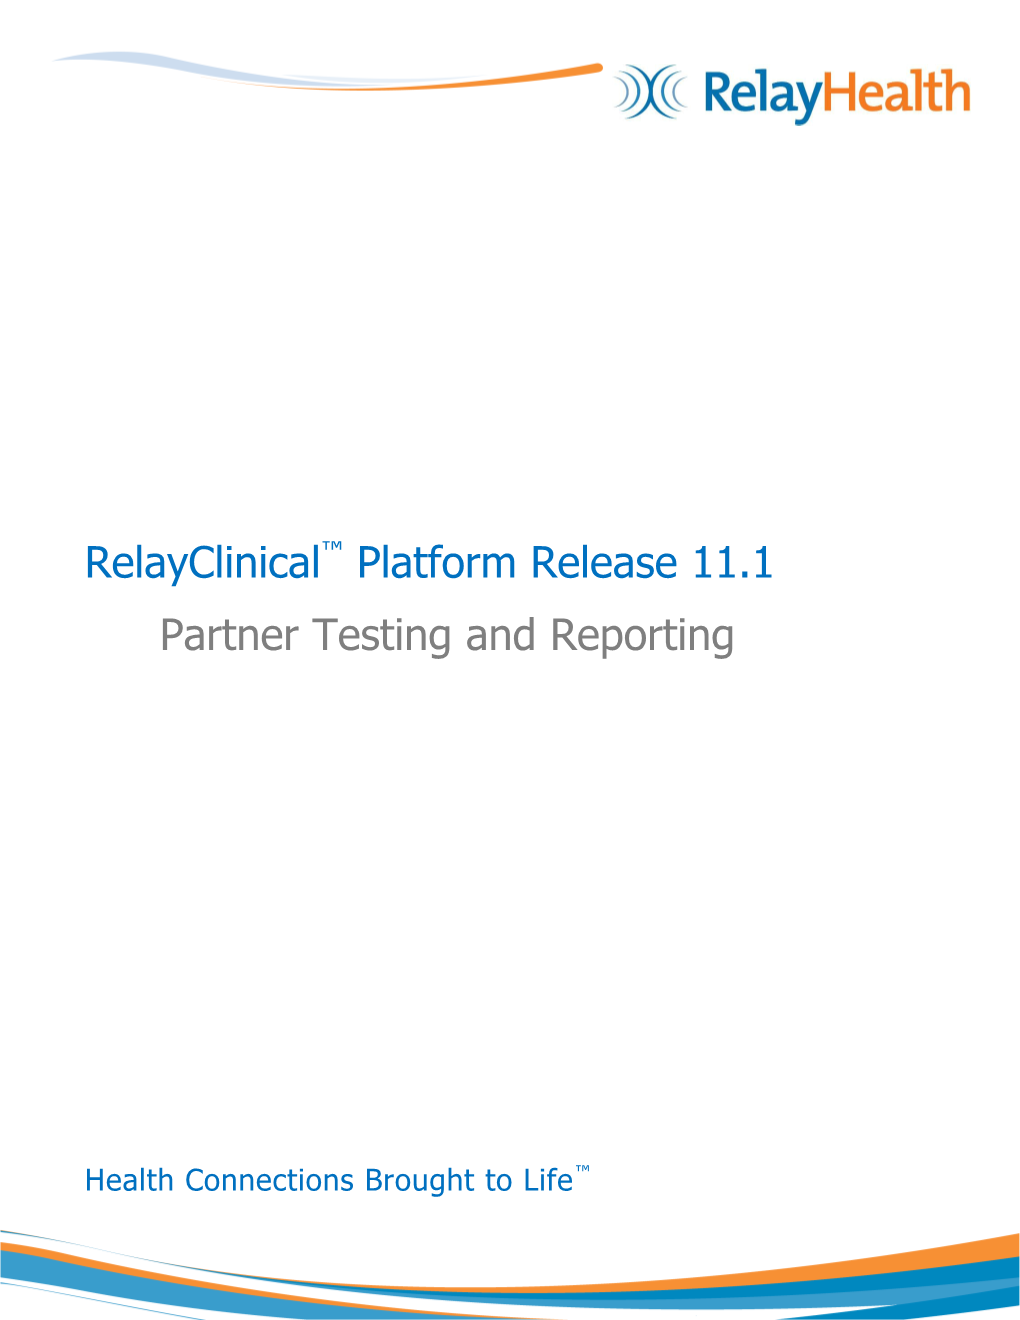 Partner Testing and Reporting